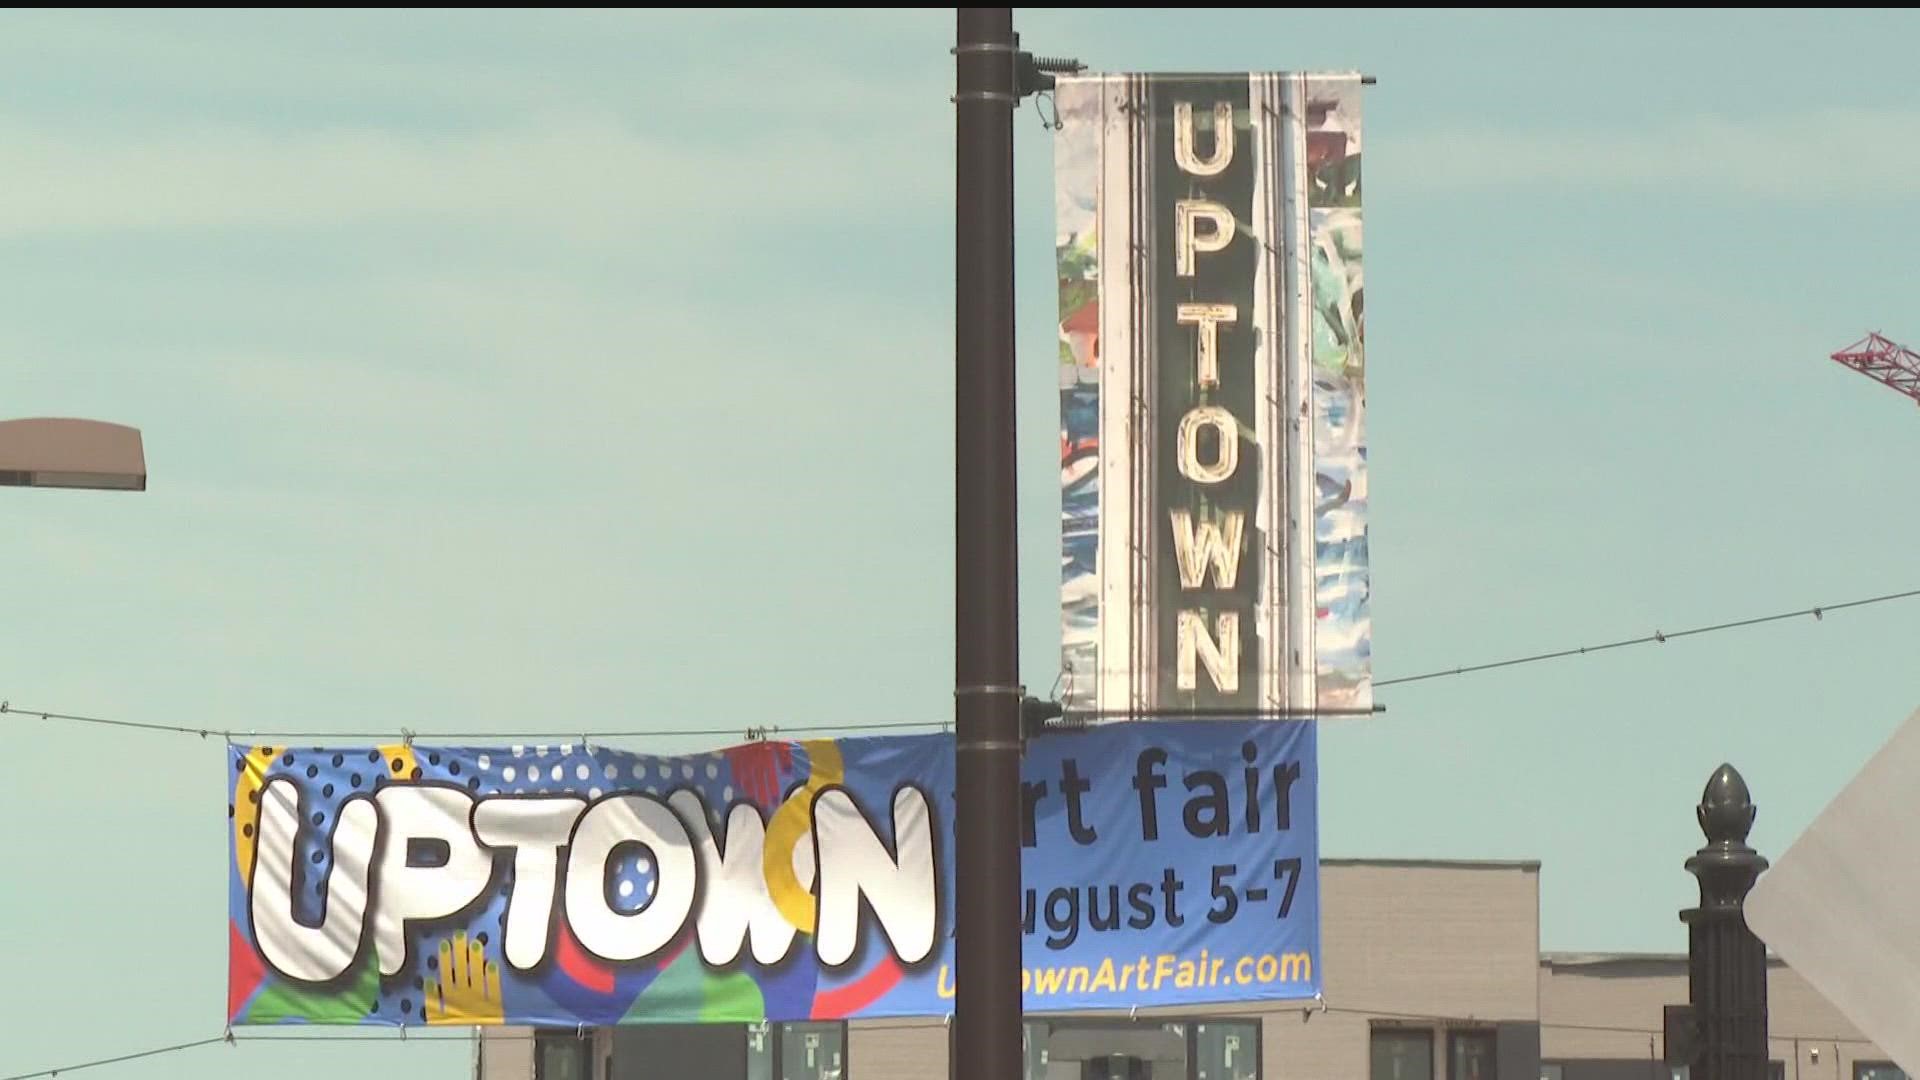 Minneapolis' uptown area is celebrating the return of the hugely popular Uptown Art Fair which had been on break for two years due to the COVID pandemic.